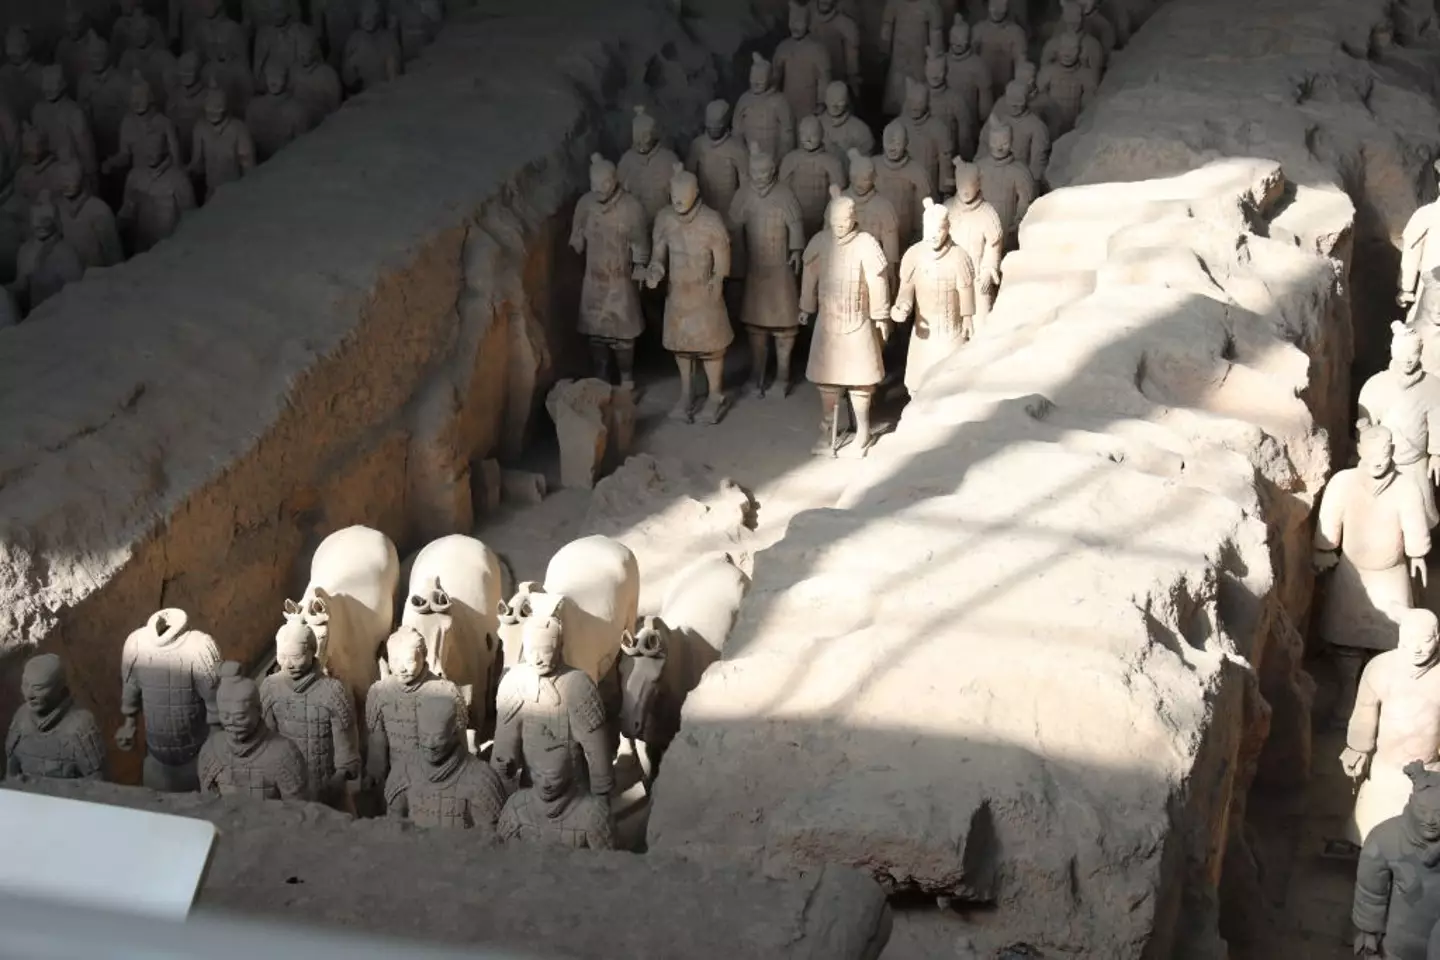 The figures are known as the terracotta warriors. (Charle He/Getty Images)